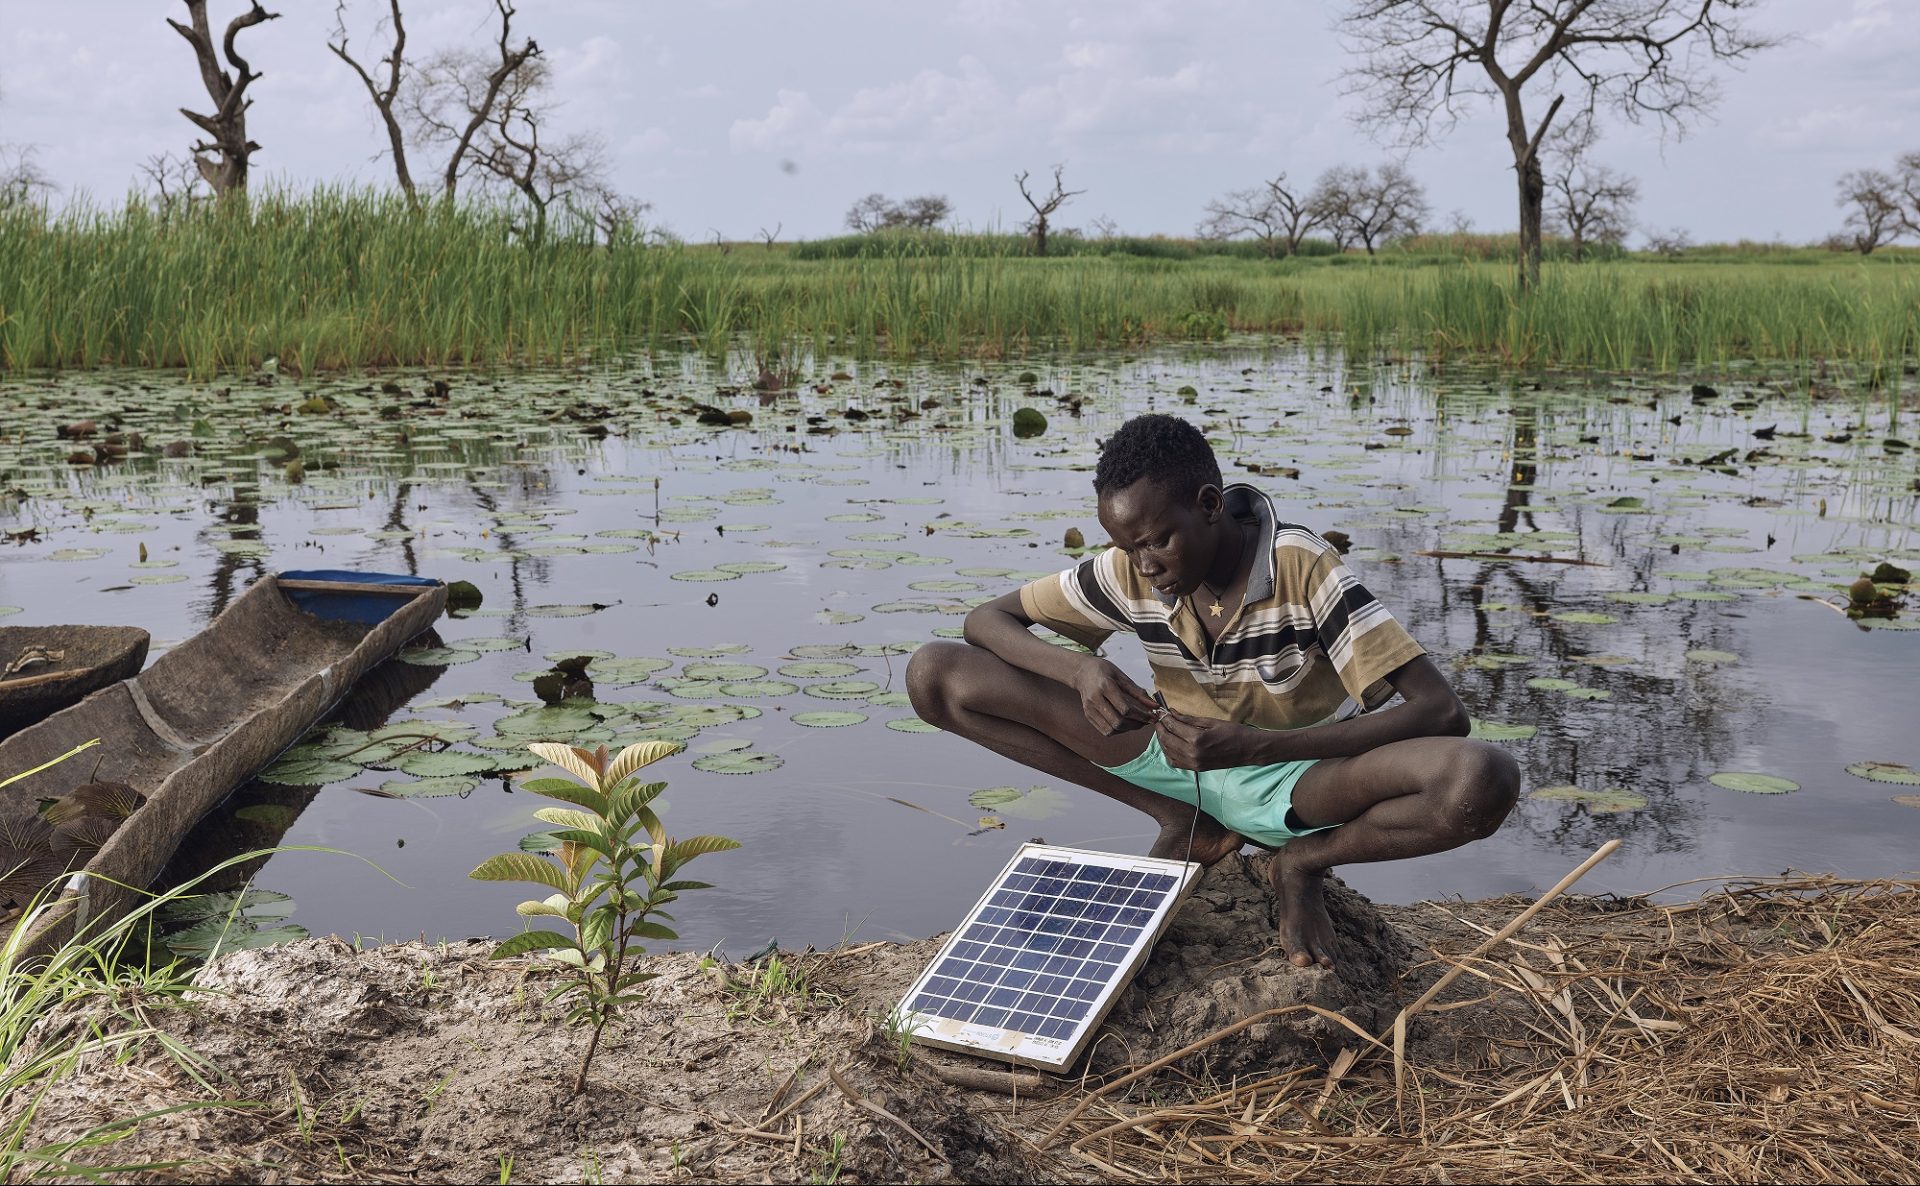 Gatwal Nhial, 9, repairs a solar panel which is their only source of power on his floating grass island in what used to be Wangkotha Village